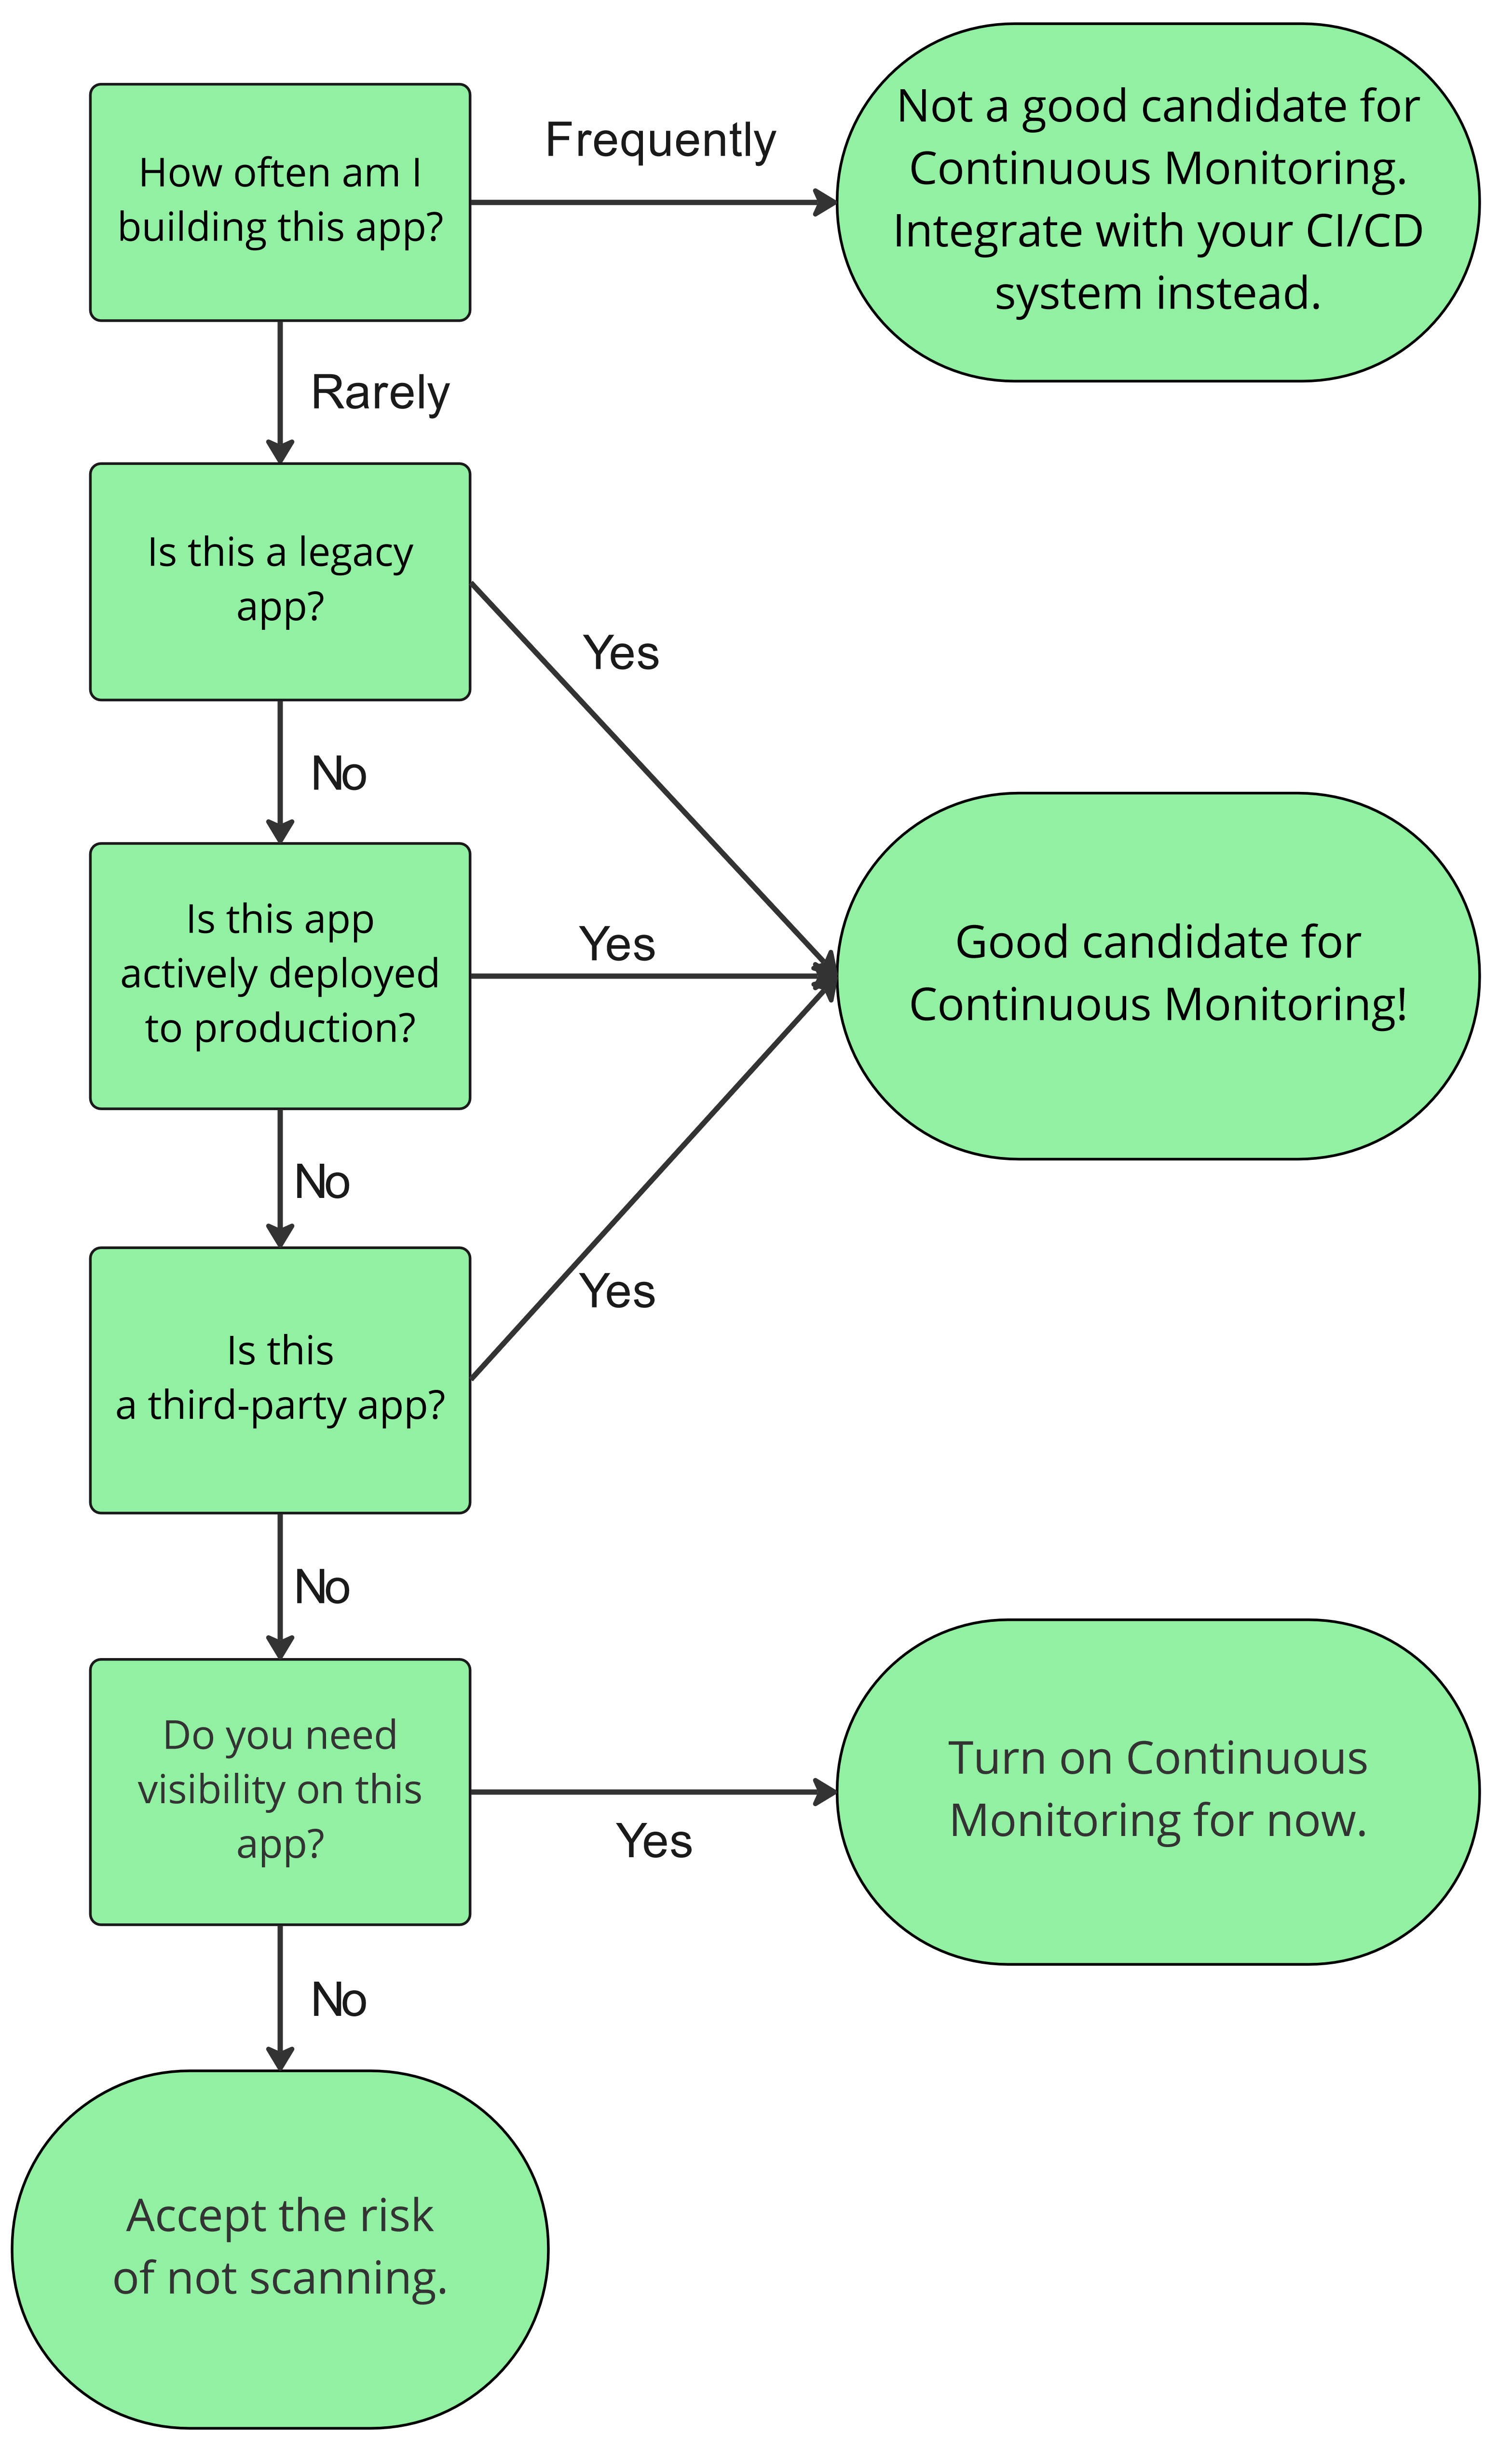 Flowchart image Continuous Monitoring decision tree. See outline after image.